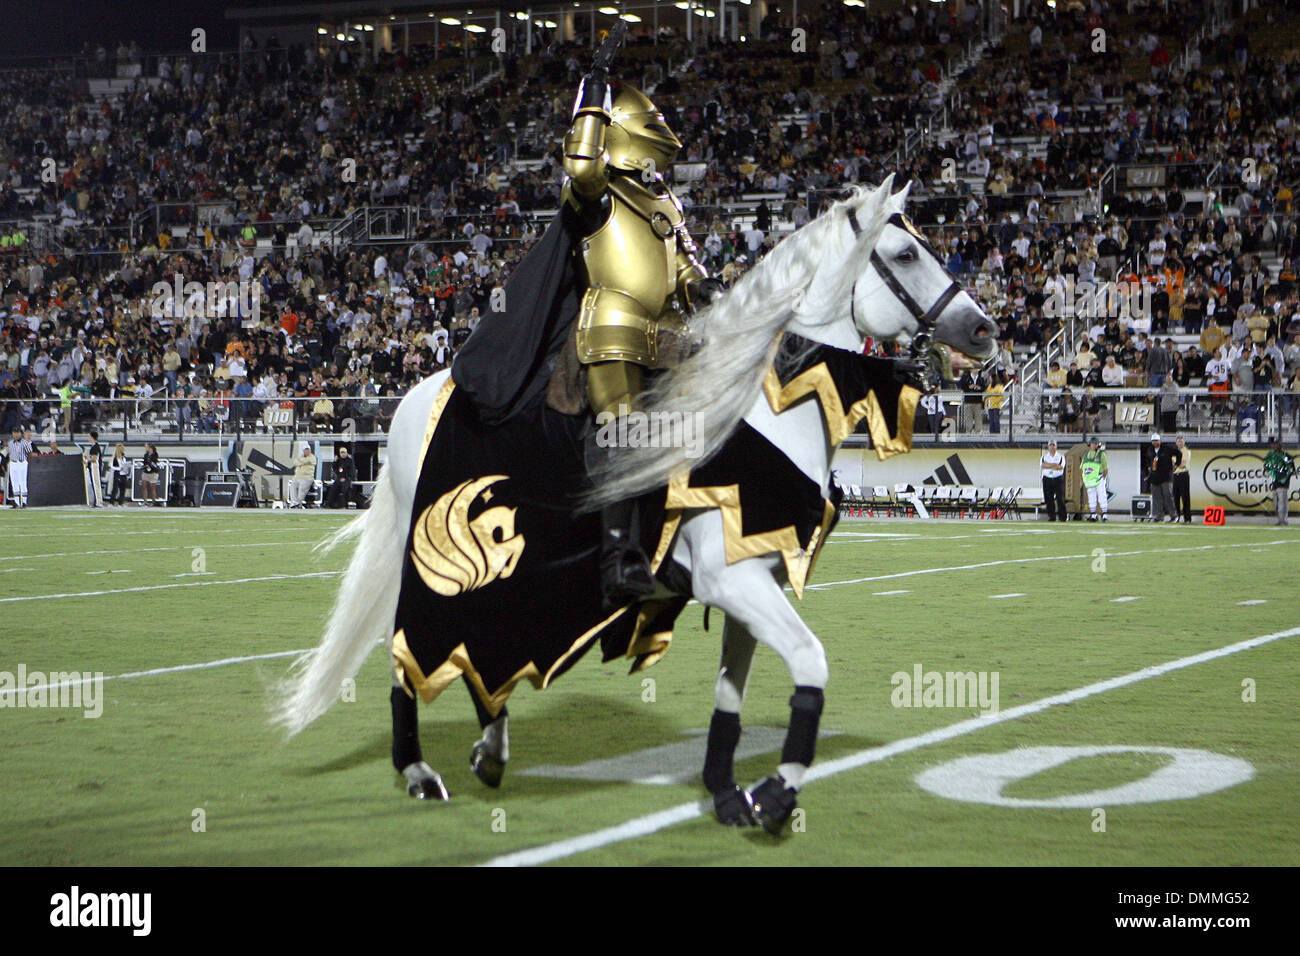 16-october-2009-ucf-knight-mascot-during-pregame-between-the-ucf-knights-DMMG52.jpg